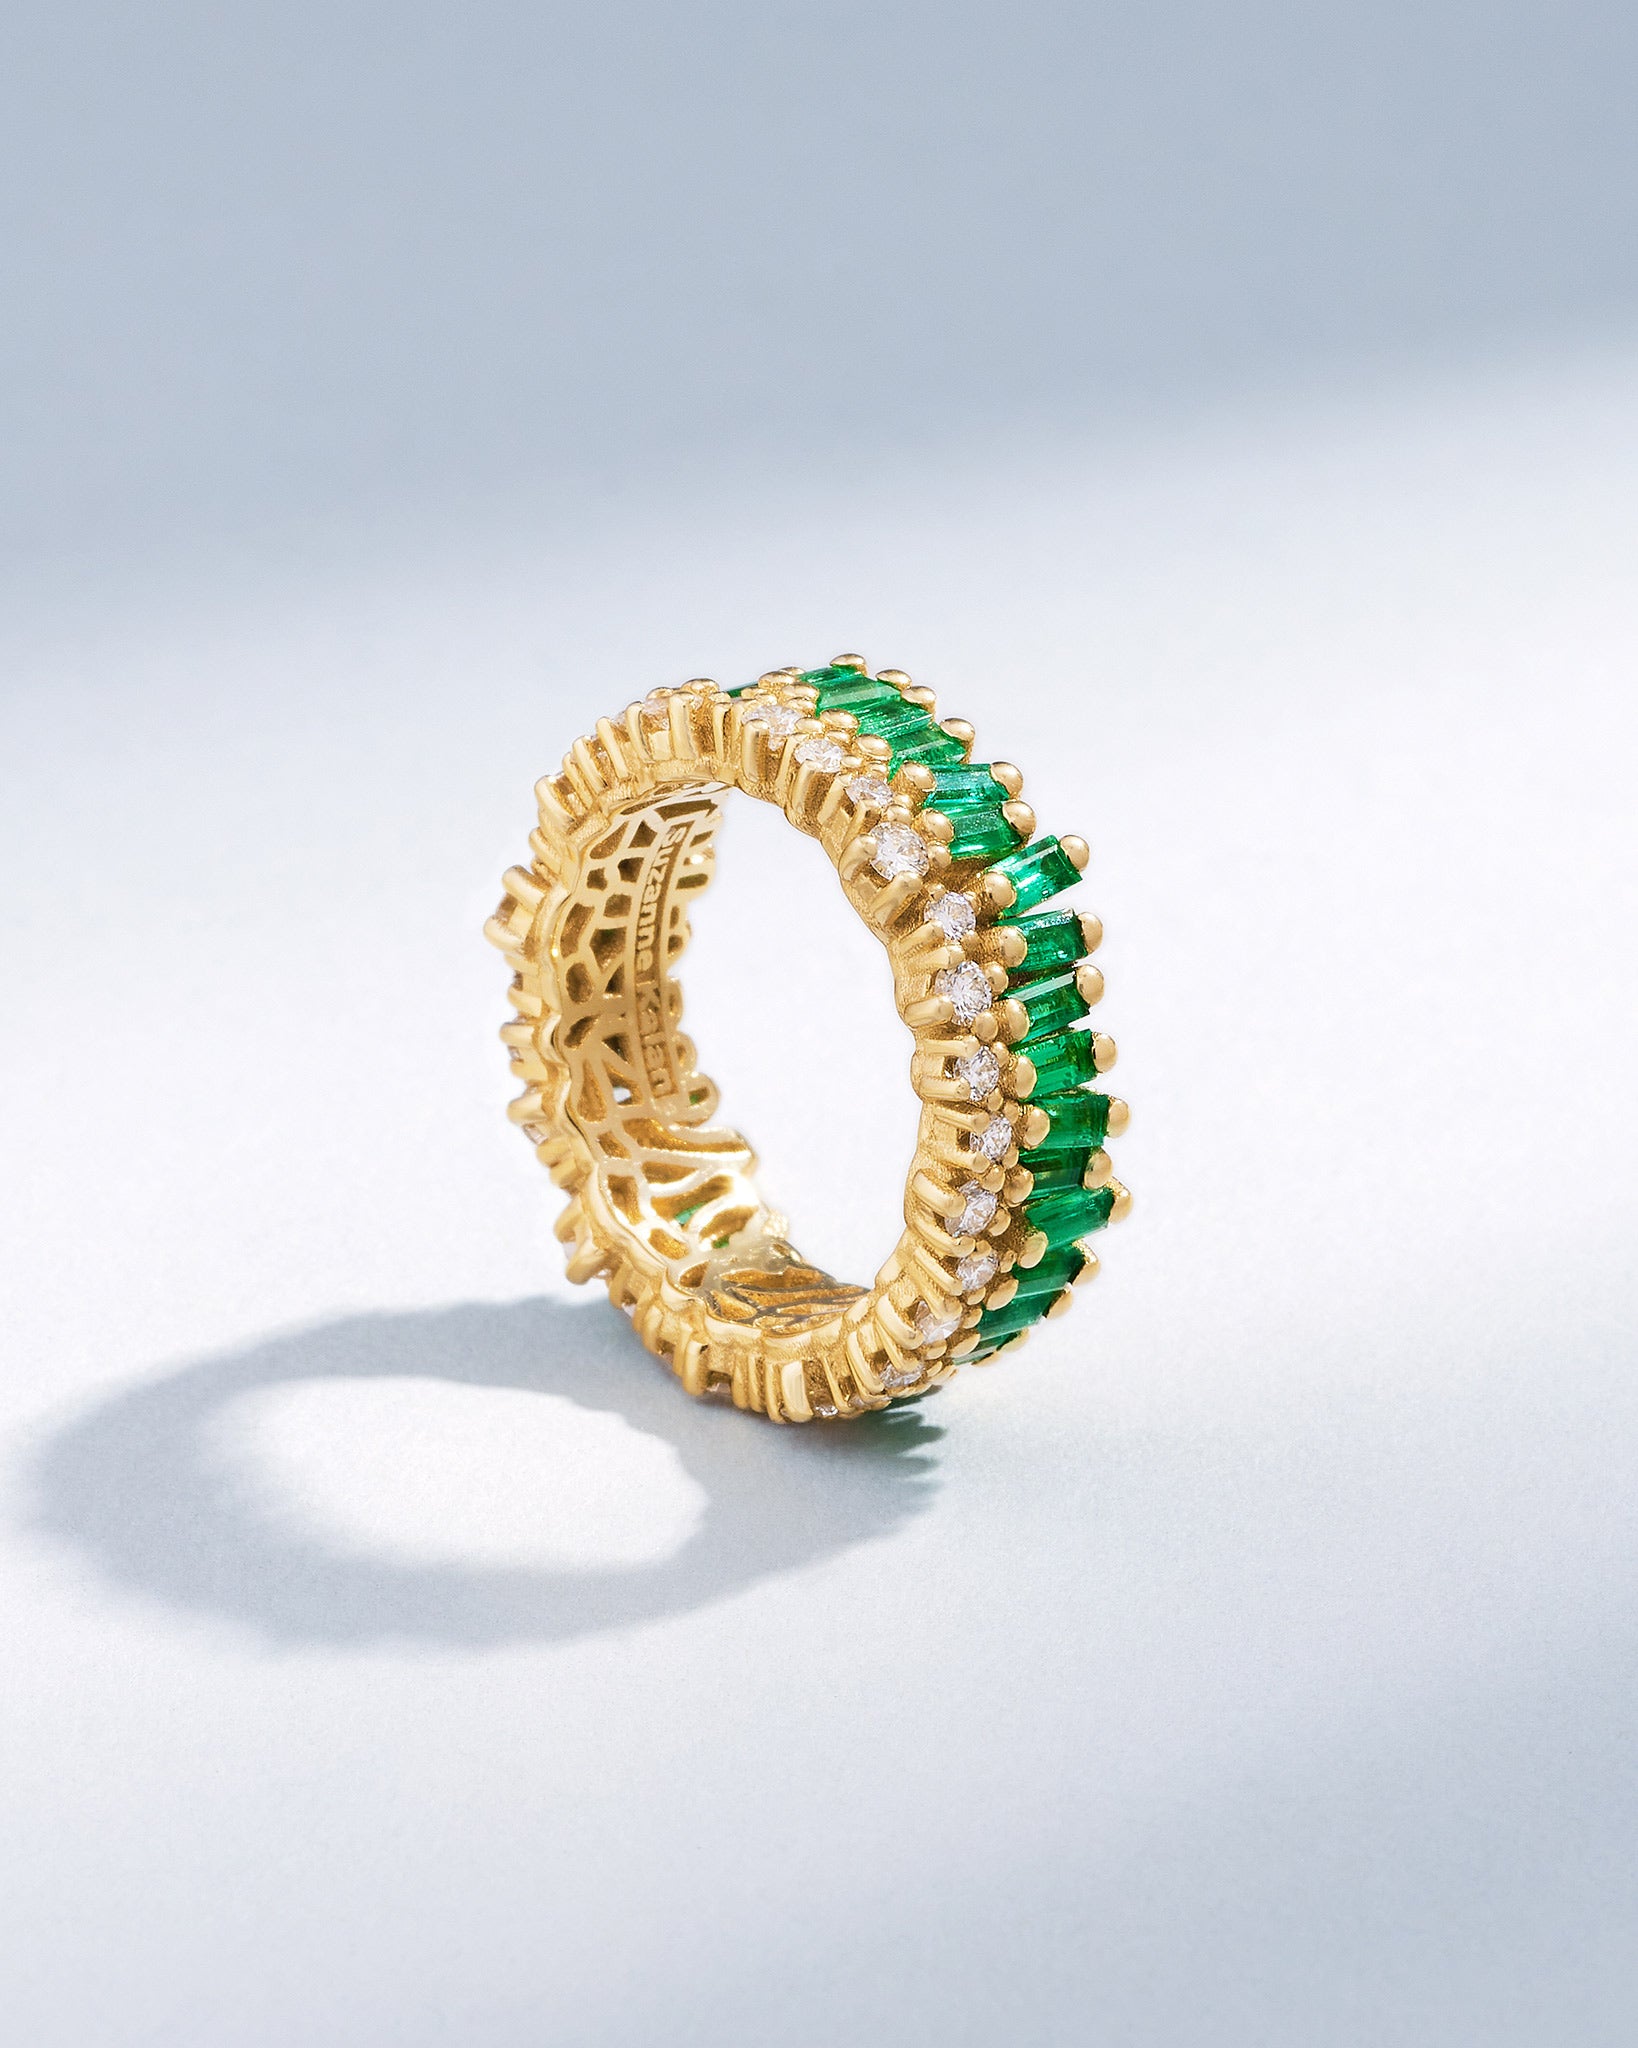 Suzanne Kalan Short Stack Emerald Eternity Band in 18k yellow gold